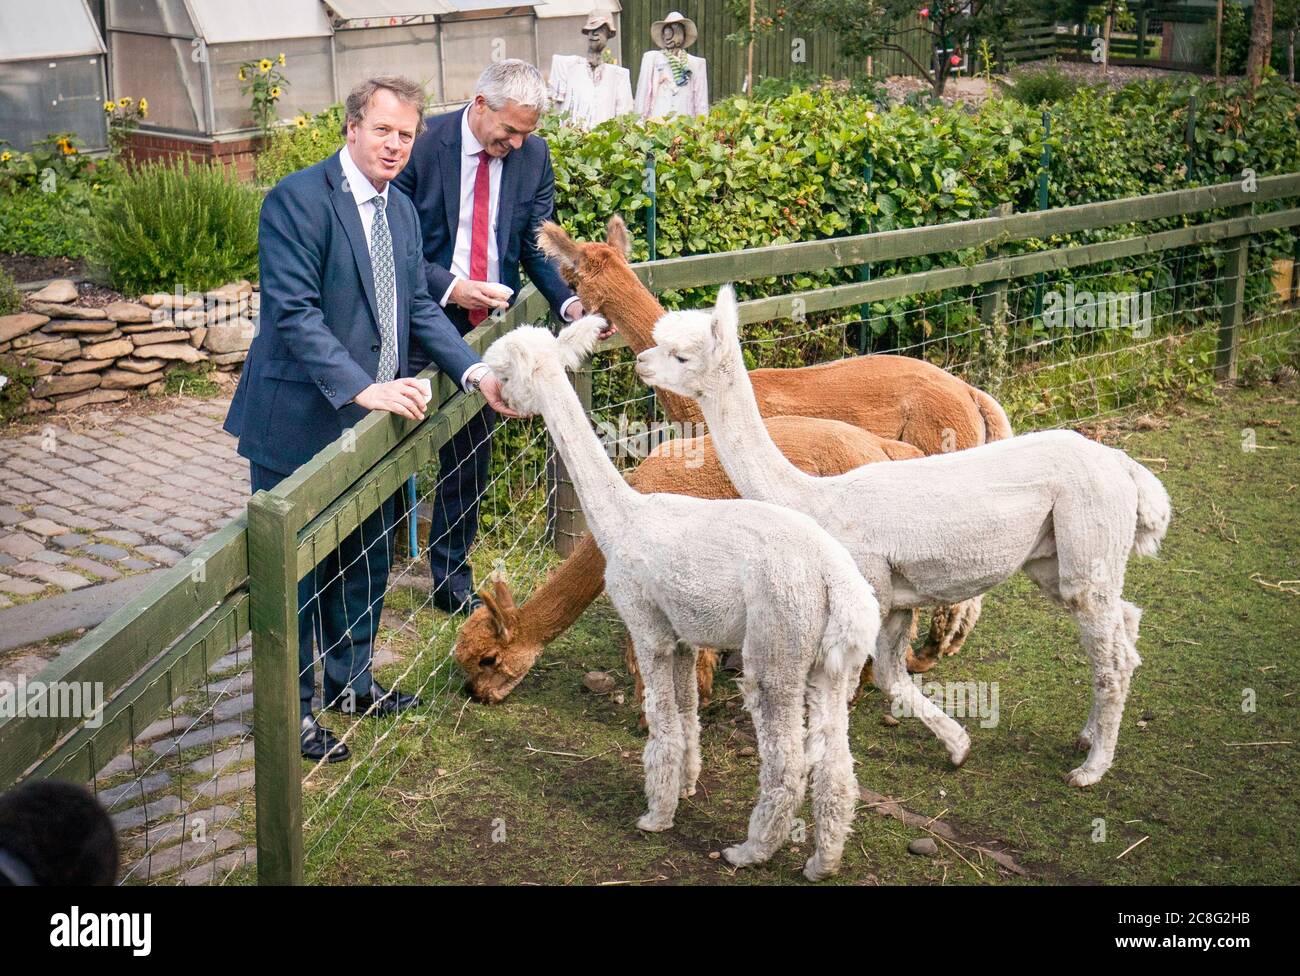 Scottish Secretary Alister Jack (left) and Chief Secretary to the Treasury Steve Barclay feed the alpacas at LOVE Gorgie City Farm in Edinburgh as it was announced that further upfront funding will be guaranteed for the devolved nations to give them certainty for the months ahead as they deal with coronavirus. Stock Photo